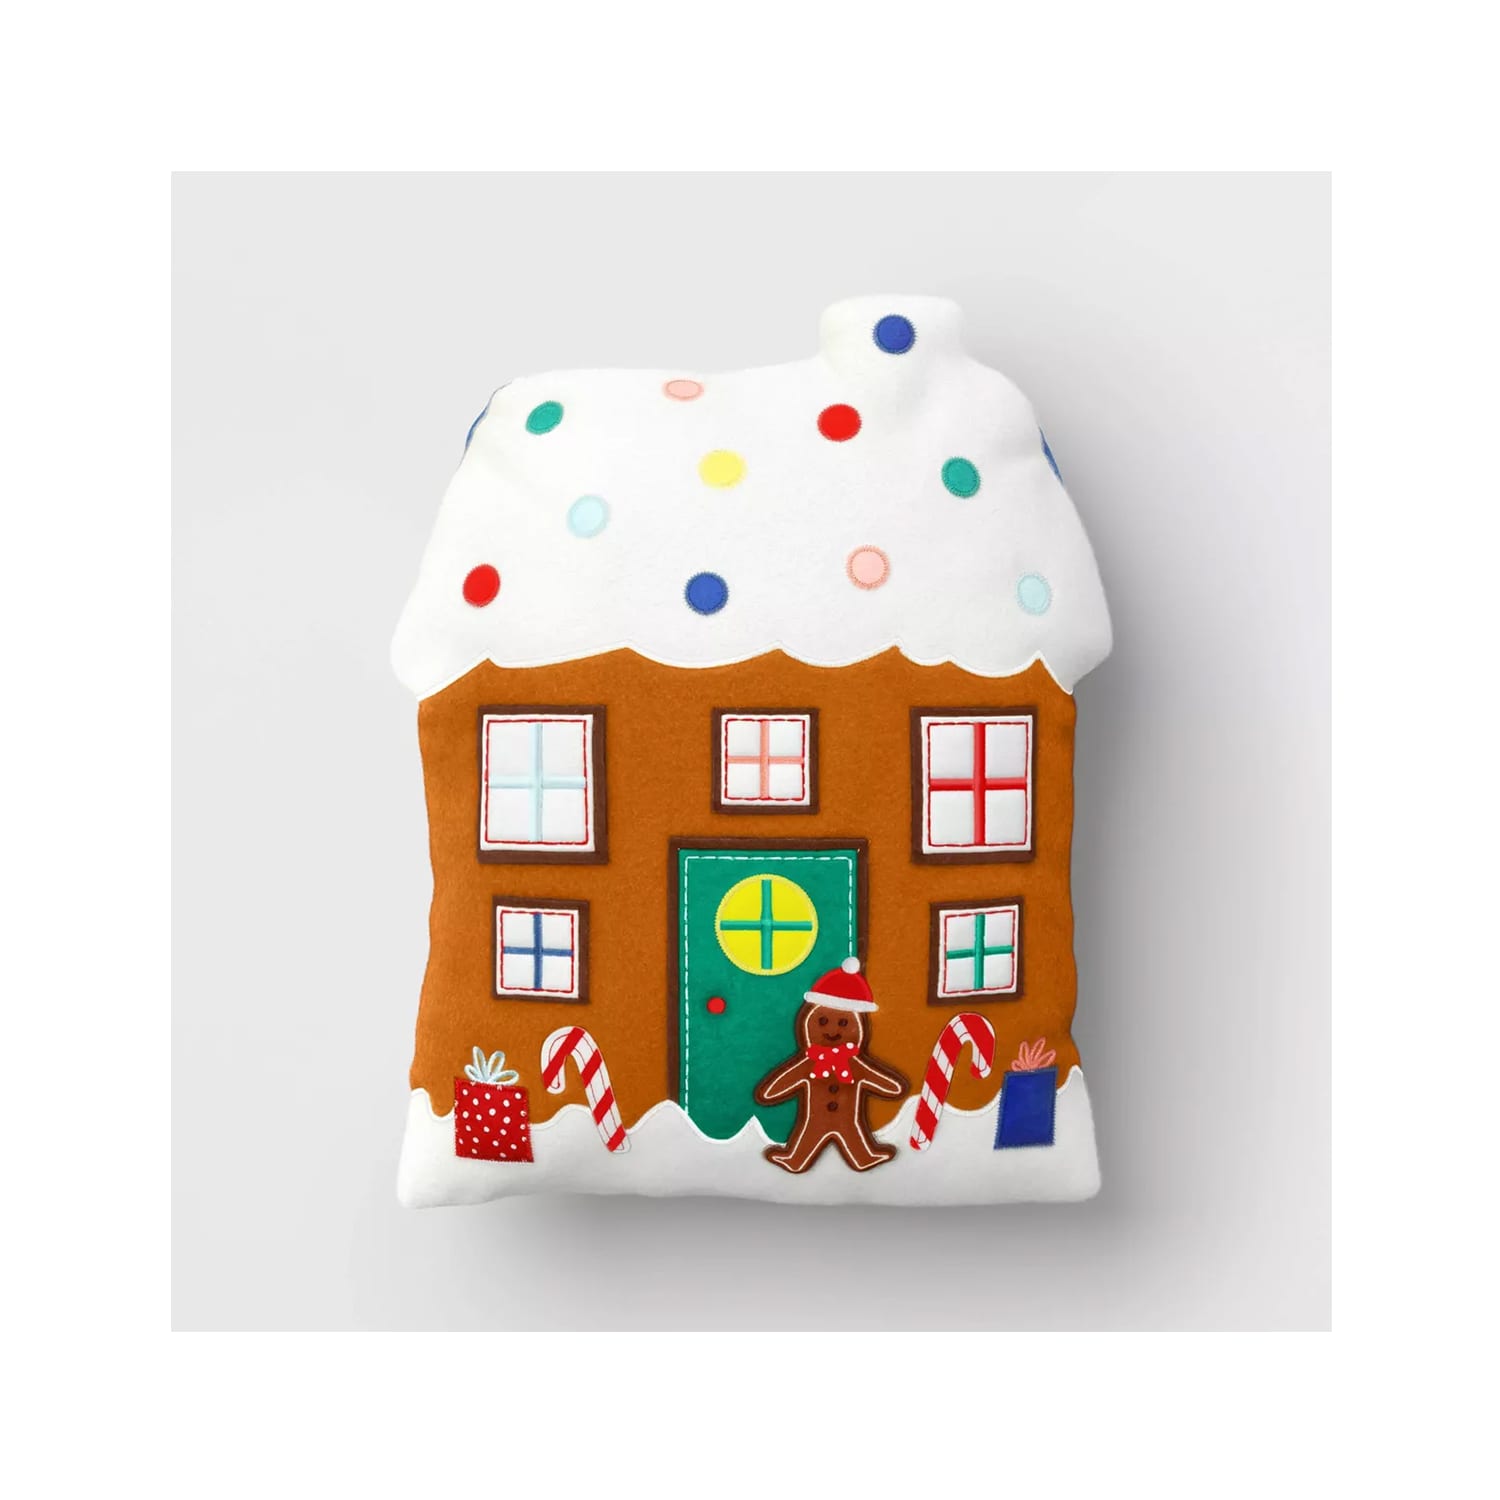 https://cdn.apartmenttherapy.info/image/upload/v1698349719/at/news-culture/reversible-gingerbread-house.jpg